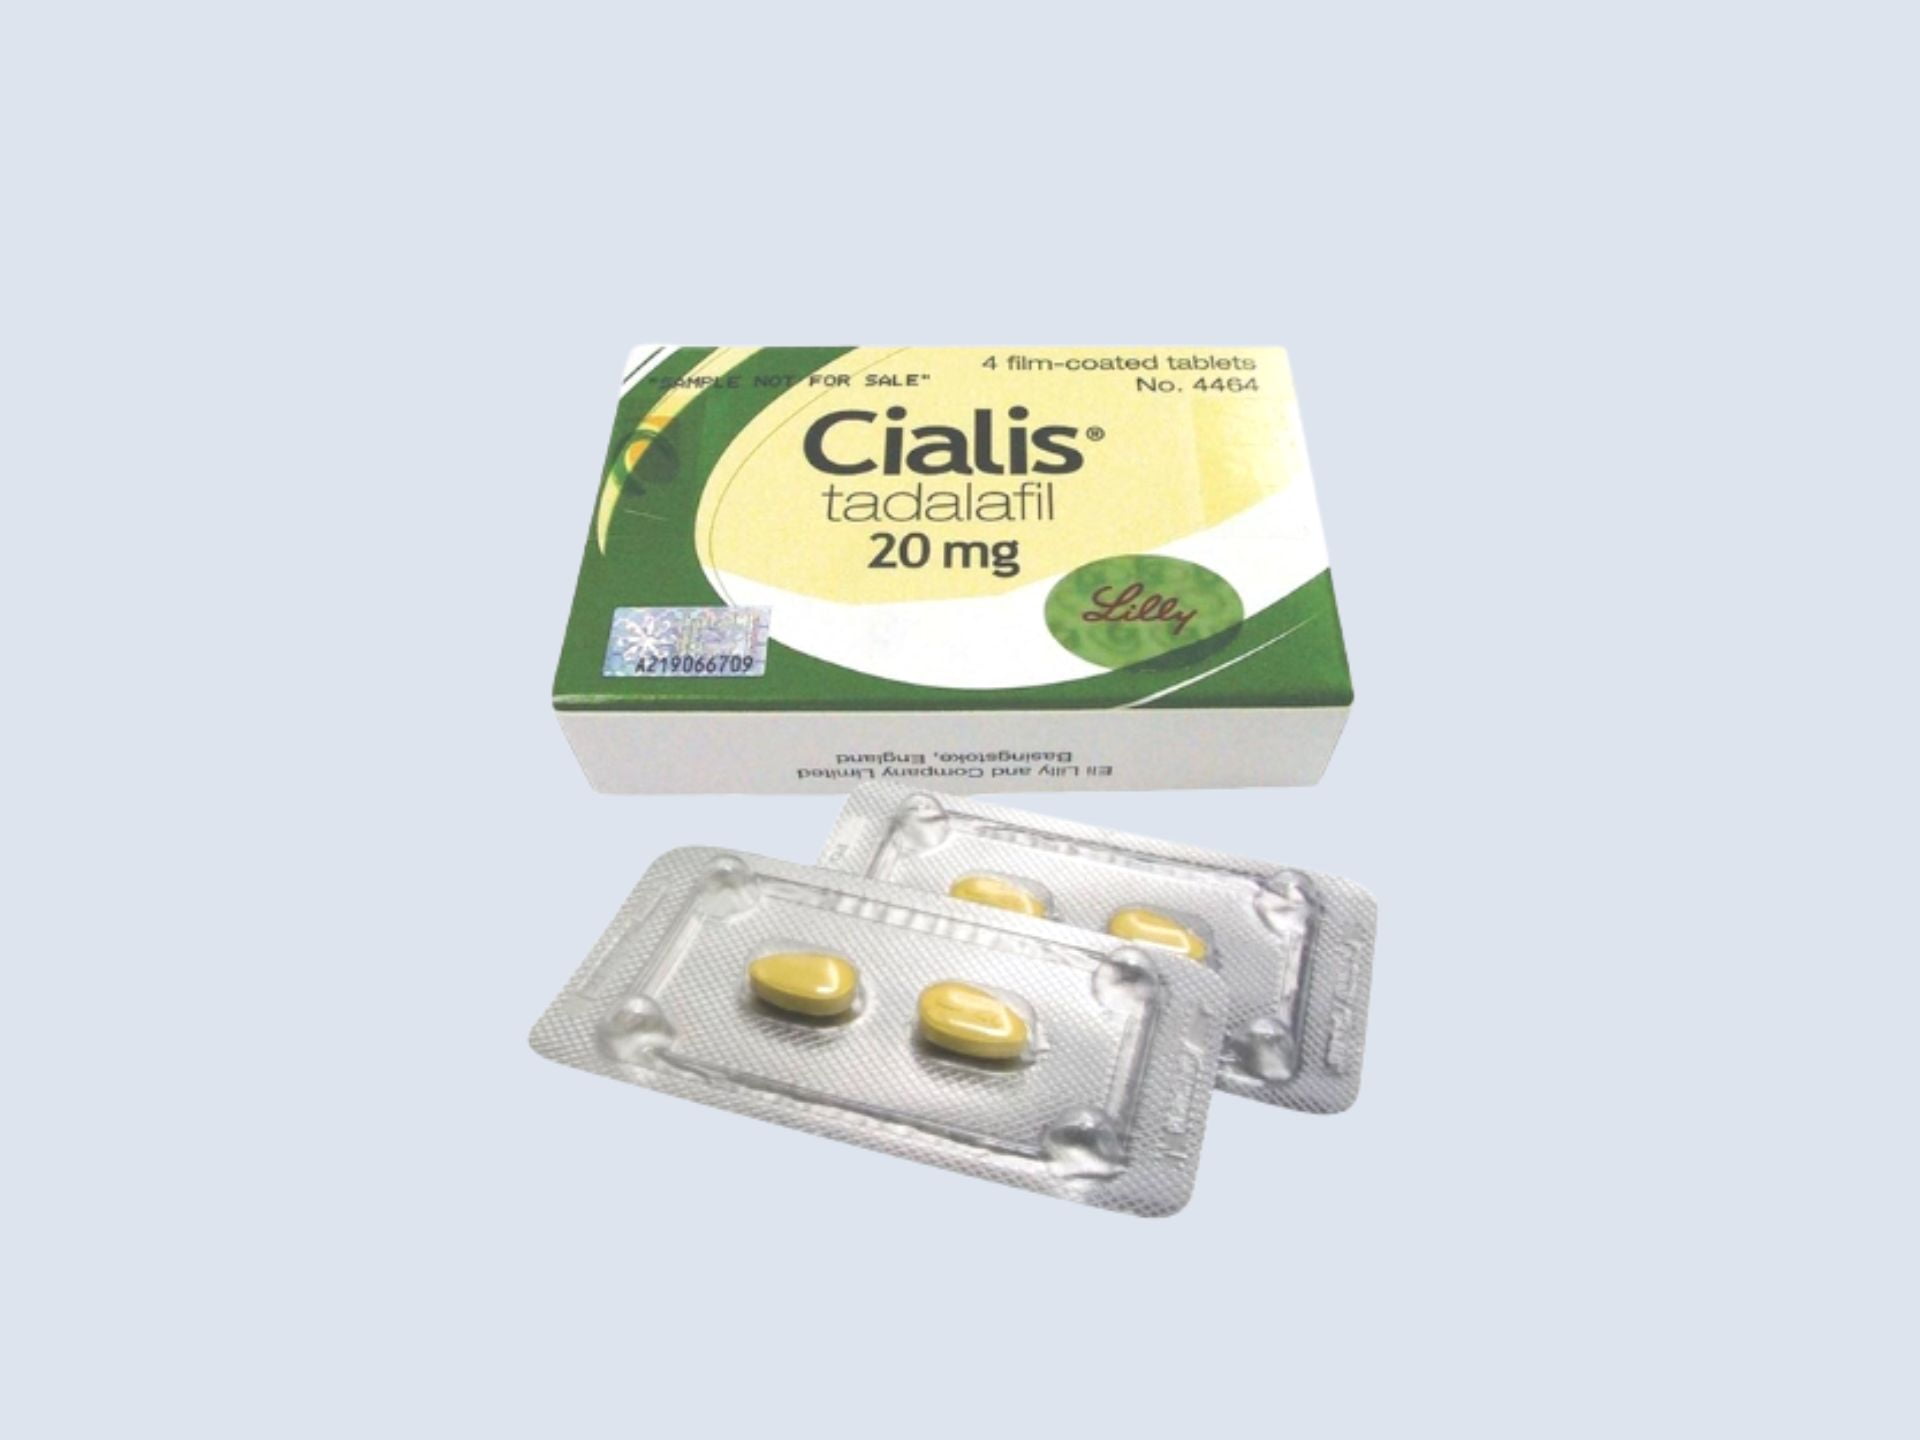 ilovechems cialis tadalafil 20mg for sale 2-ilovechems